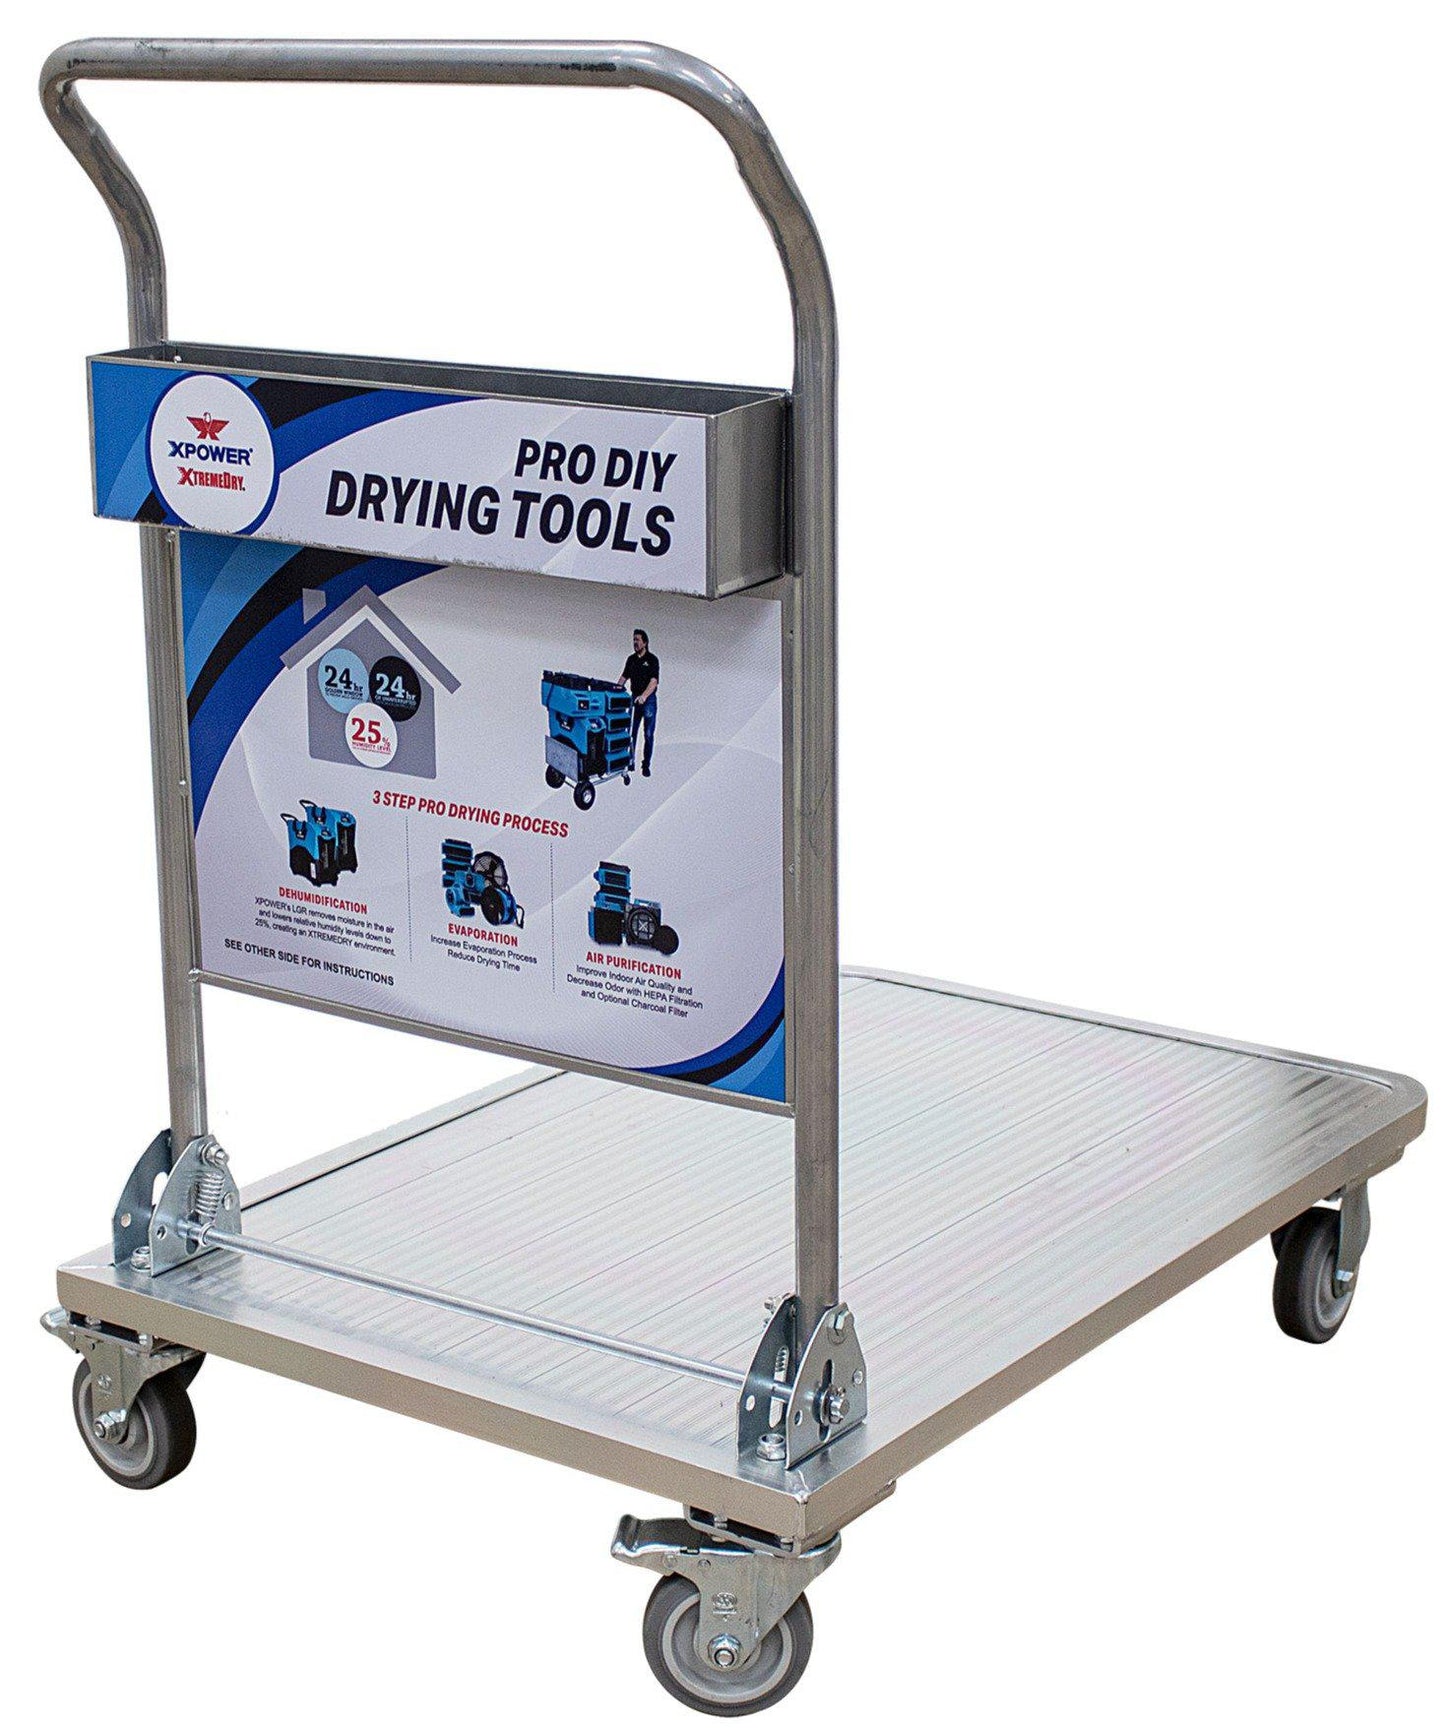 XPOWER XtremeDry PRO DIY Drying Tool Cart-Accessories-Pet's Choice Supply